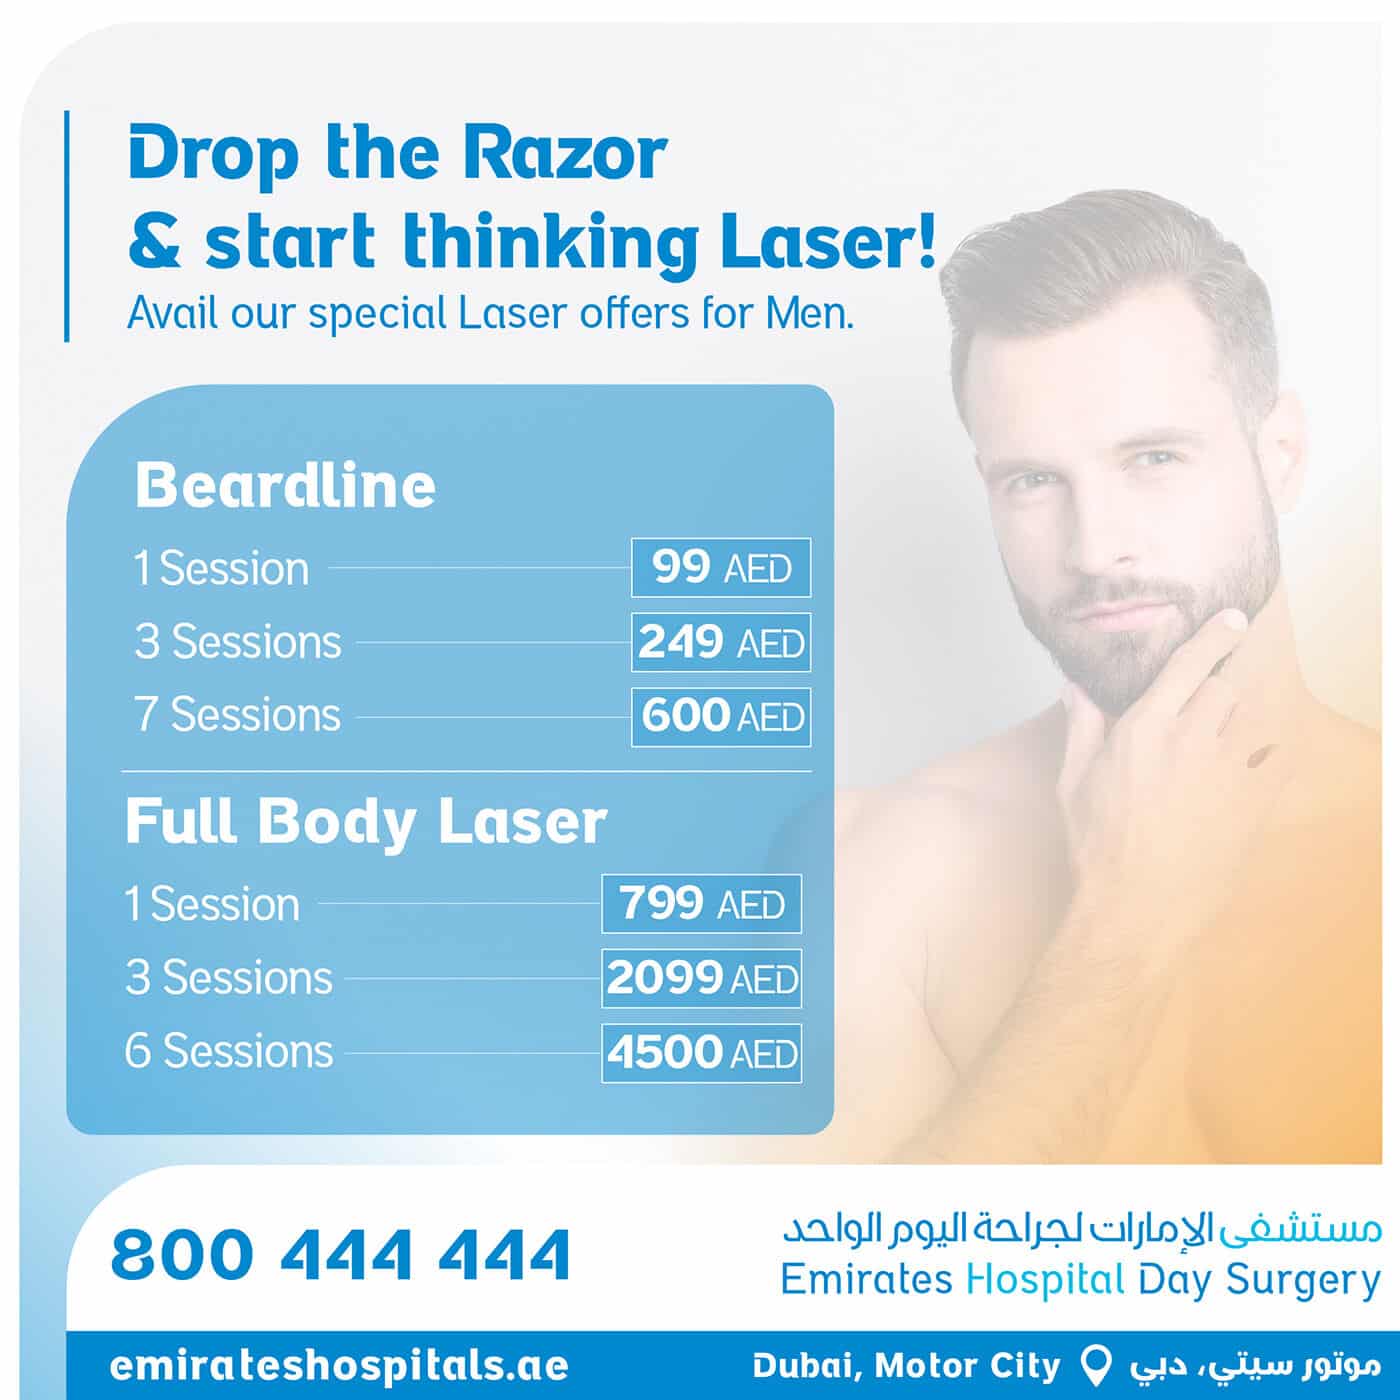 Full Body Laser and Breadline offers for Man , Emirates Hospital Day  Surgery, Motor City - Emirates Hospitals Group